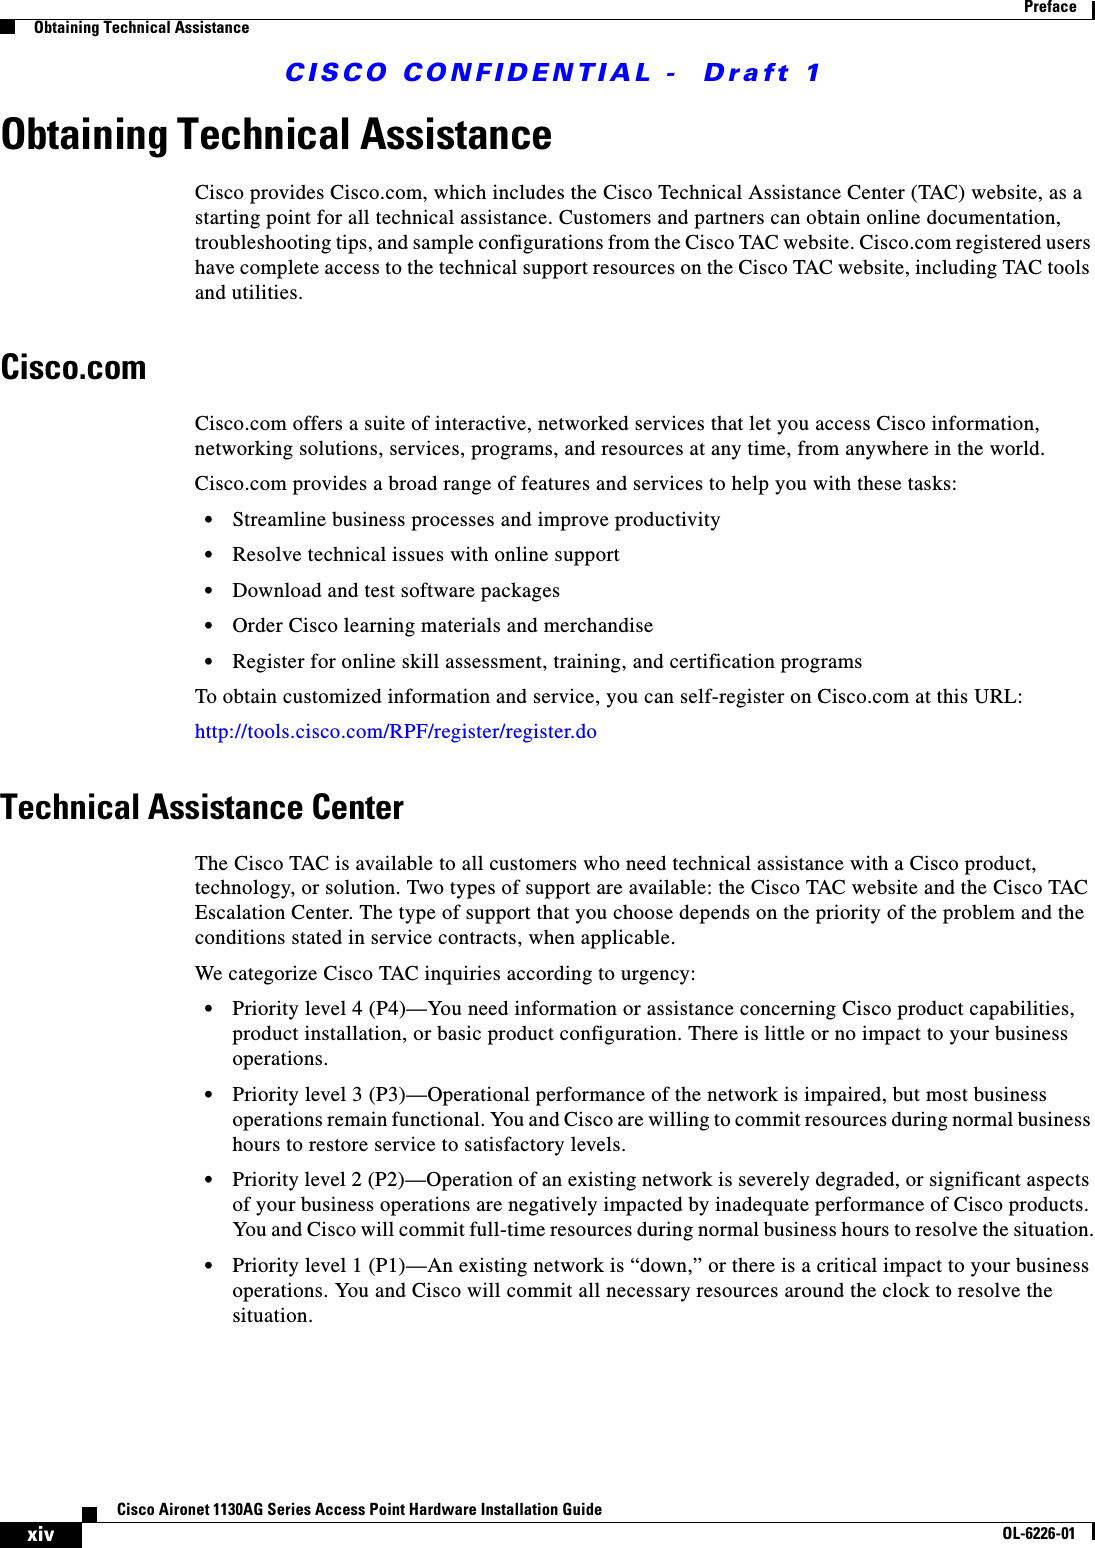  CISCO CONFIDENTIAL -  Draft 1xivCisco Aironet 1130AG Series Access Point Hardware Installation GuideOL-6226-01PrefaceObtaining Technical AssistanceObtaining Technical AssistanceCisco provides Cisco.com, which includes the Cisco Technical Assistance Center (TAC) website, as a starting point for all technical assistance. Customers and partners can obtain online documentation, troubleshooting tips, and sample configurations from the Cisco TAC website. Cisco.com registered users have complete access to the technical support resources on the Cisco TAC website, including TAC tools and utilities. Cisco.comCisco.com offers a suite of interactive, networked services that let you access Cisco information, networking solutions, services, programs, and resources at any time, from anywhere in the world. Cisco.com provides a broad range of features and services to help you with these tasks:•Streamline business processes and improve productivity •Resolve technical issues with online support•Download and test software packages•Order Cisco learning materials and merchandise•Register for online skill assessment, training, and certification programsTo obtain customized information and service, you can self-register on Cisco.com at this URL:http://tools.cisco.com/RPF/register/register.doTechnical Assistance CenterThe Cisco TAC is available to all customers who need technical assistance with a Cisco product, technology, or solution. Two types of support are available: the Cisco TAC website and the Cisco TAC Escalation Center. The type of support that you choose depends on the priority of the problem and the conditions stated in service contracts, when applicable.We categorize Cisco TAC inquiries according to urgency:•Priority level 4 (P4)—You need information or assistance concerning Cisco product capabilities, product installation, or basic product configuration. There is little or no impact to your business operations.•Priority level 3 (P3)—Operational performance of the network is impaired, but most business operations remain functional. You and Cisco are willing to commit resources during normal business hours to restore service to satisfactory levels.•Priority level 2 (P2)—Operation of an existing network is severely degraded, or significant aspects of your business operations are negatively impacted by inadequate performance of Cisco products. You and Cisco will commit full-time resources during normal business hours to resolve the situation.•Priority level 1 (P1)—An existing network is “down,” or there is a critical impact to your business operations. You and Cisco will commit all necessary resources around the clock to resolve the situation.